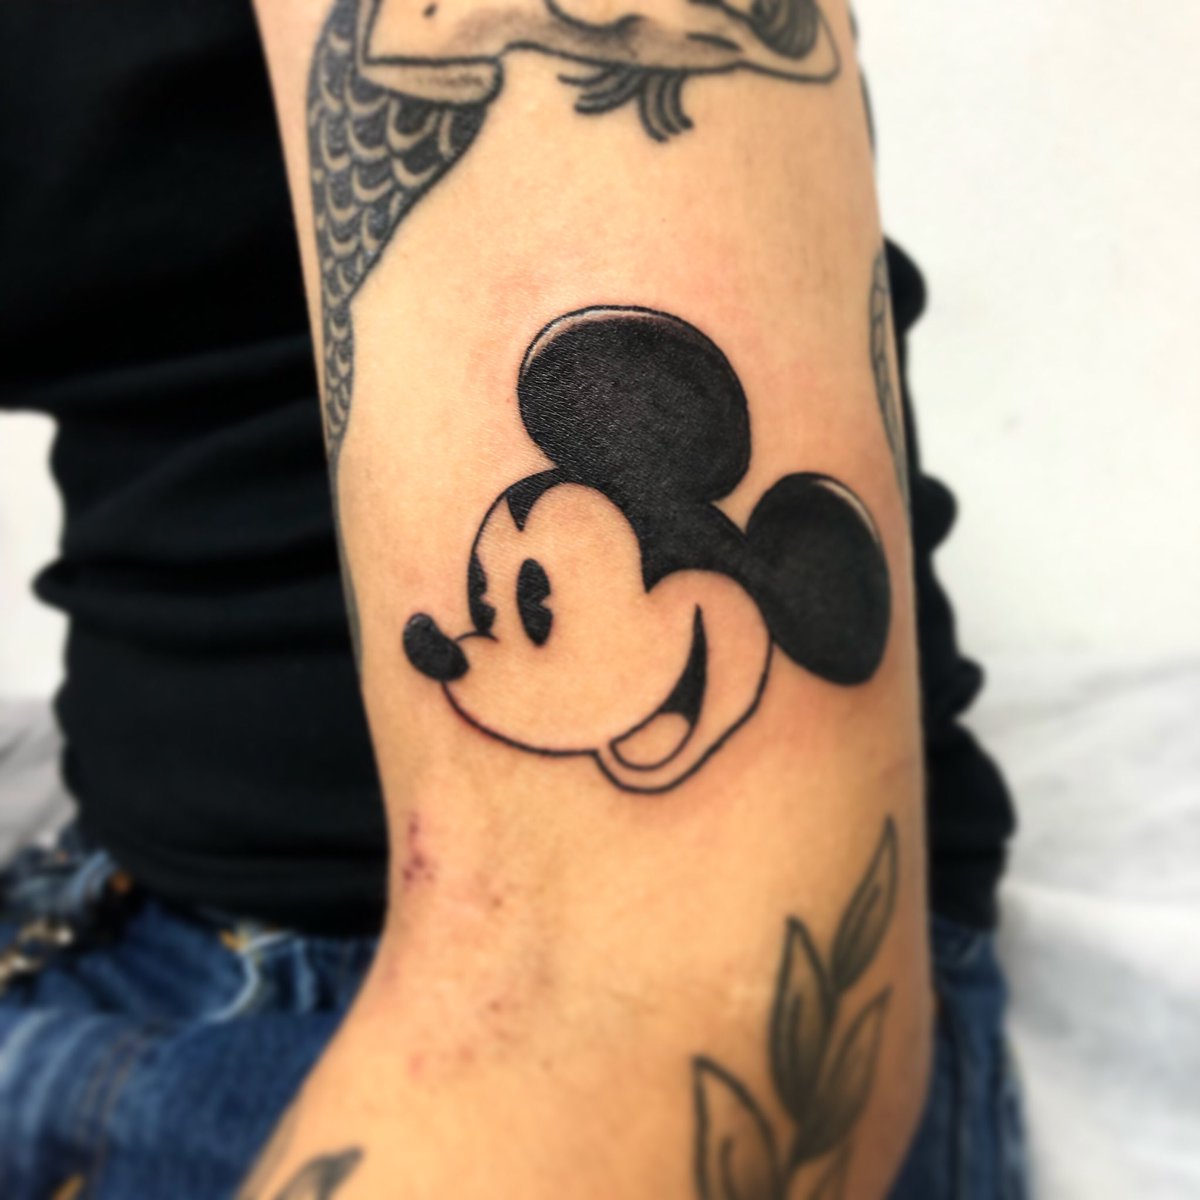 Ren Tattooing Sur Twitter Mickey Mouse ミッキー ミッキーマウス タトゥー 刺青 Tattoo モニター募集 モニターモデル募集